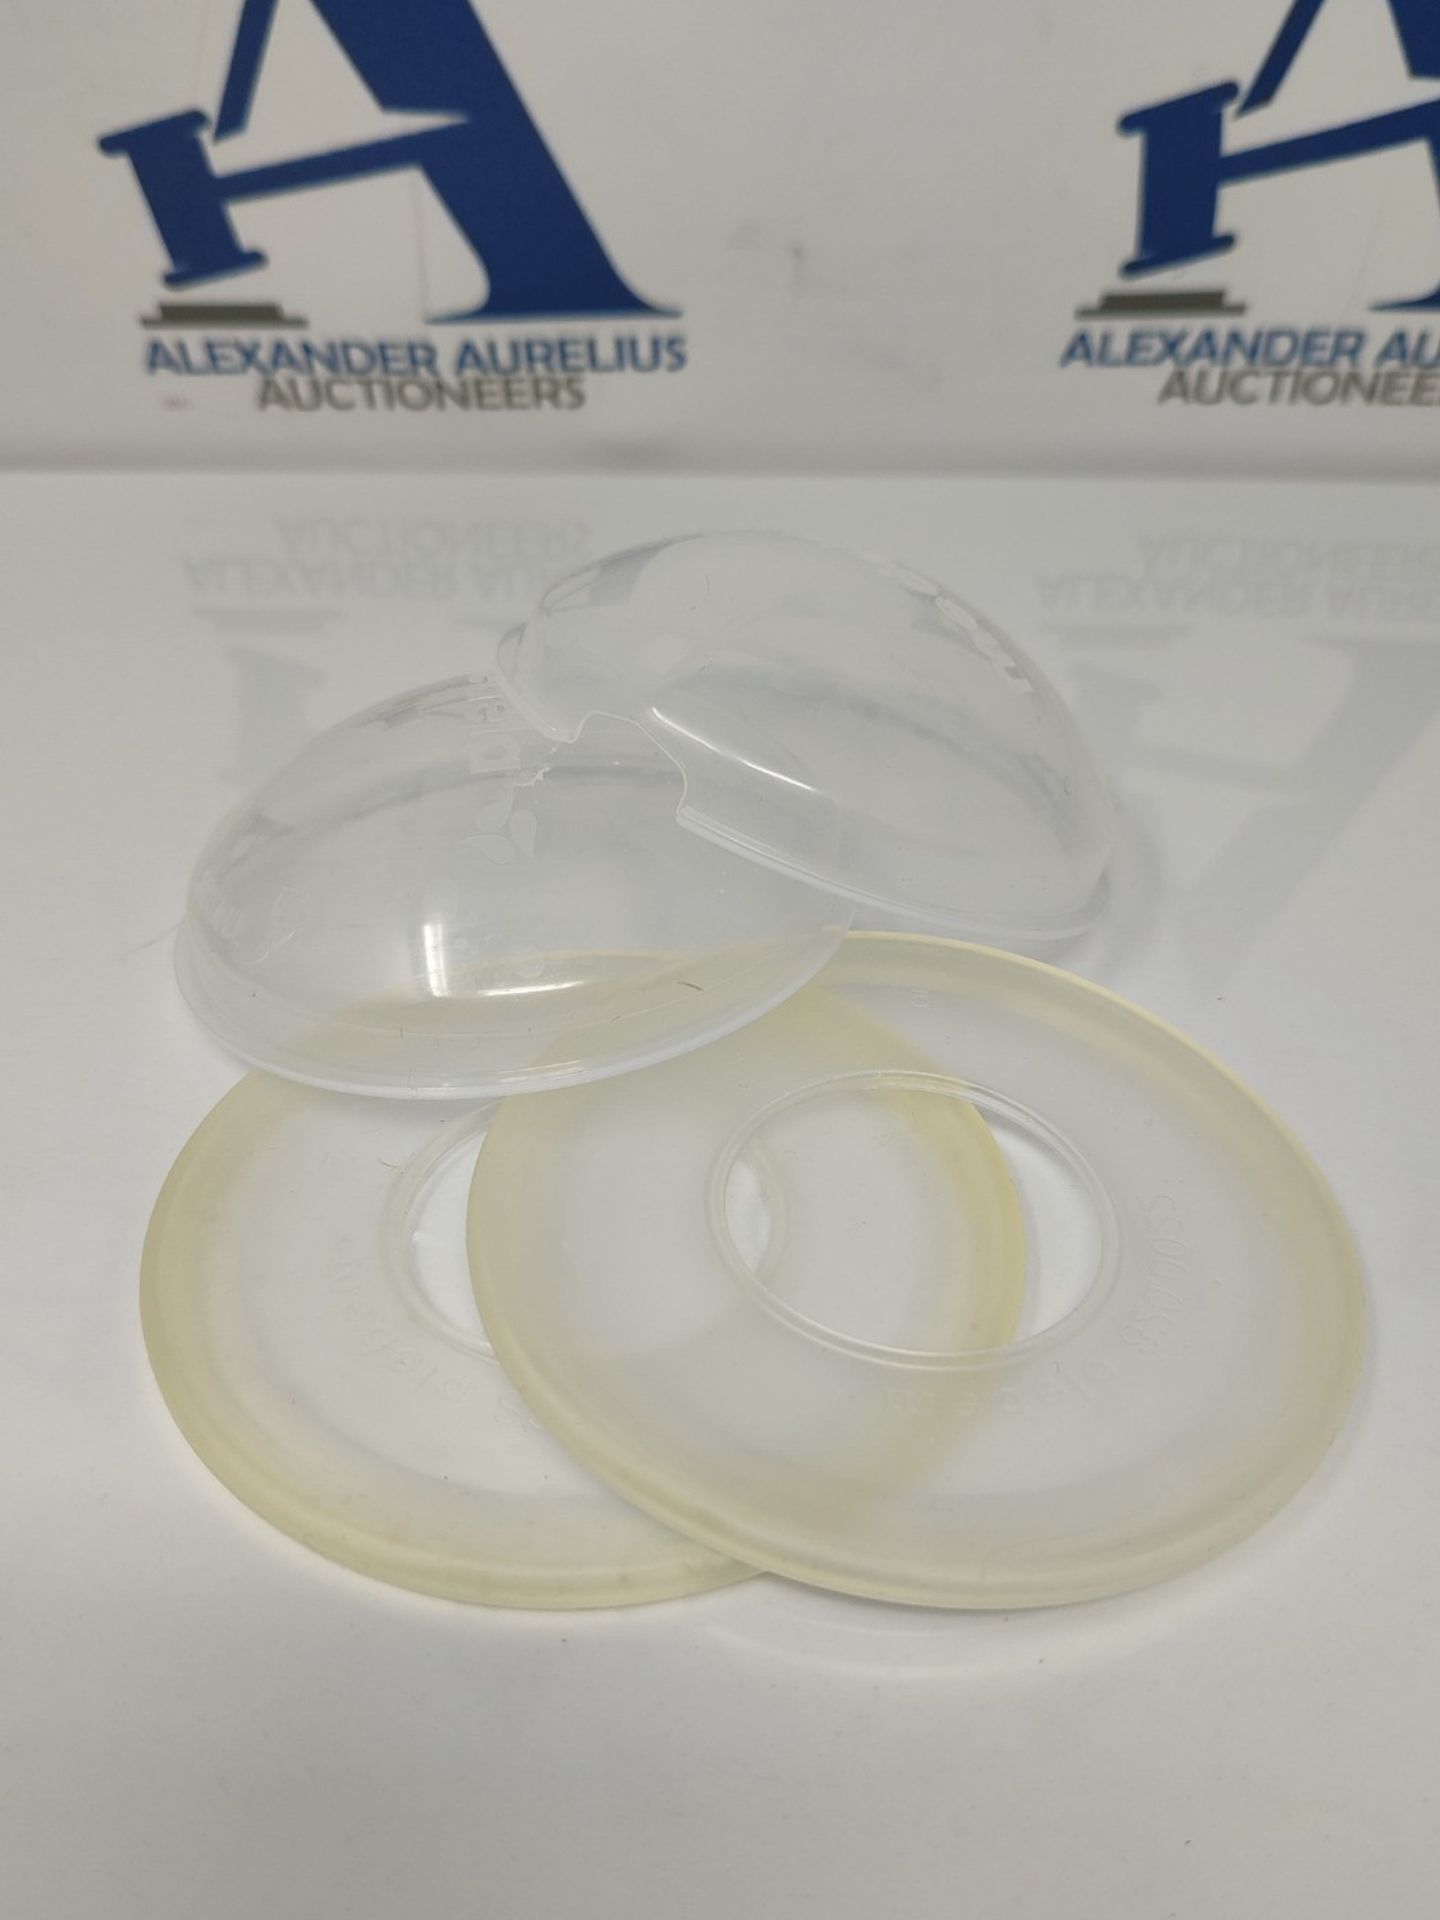 Medela Breast Milk Collector Shells, Silicone Breastmilk Collection Nipple Shells, Pac - Image 3 of 3